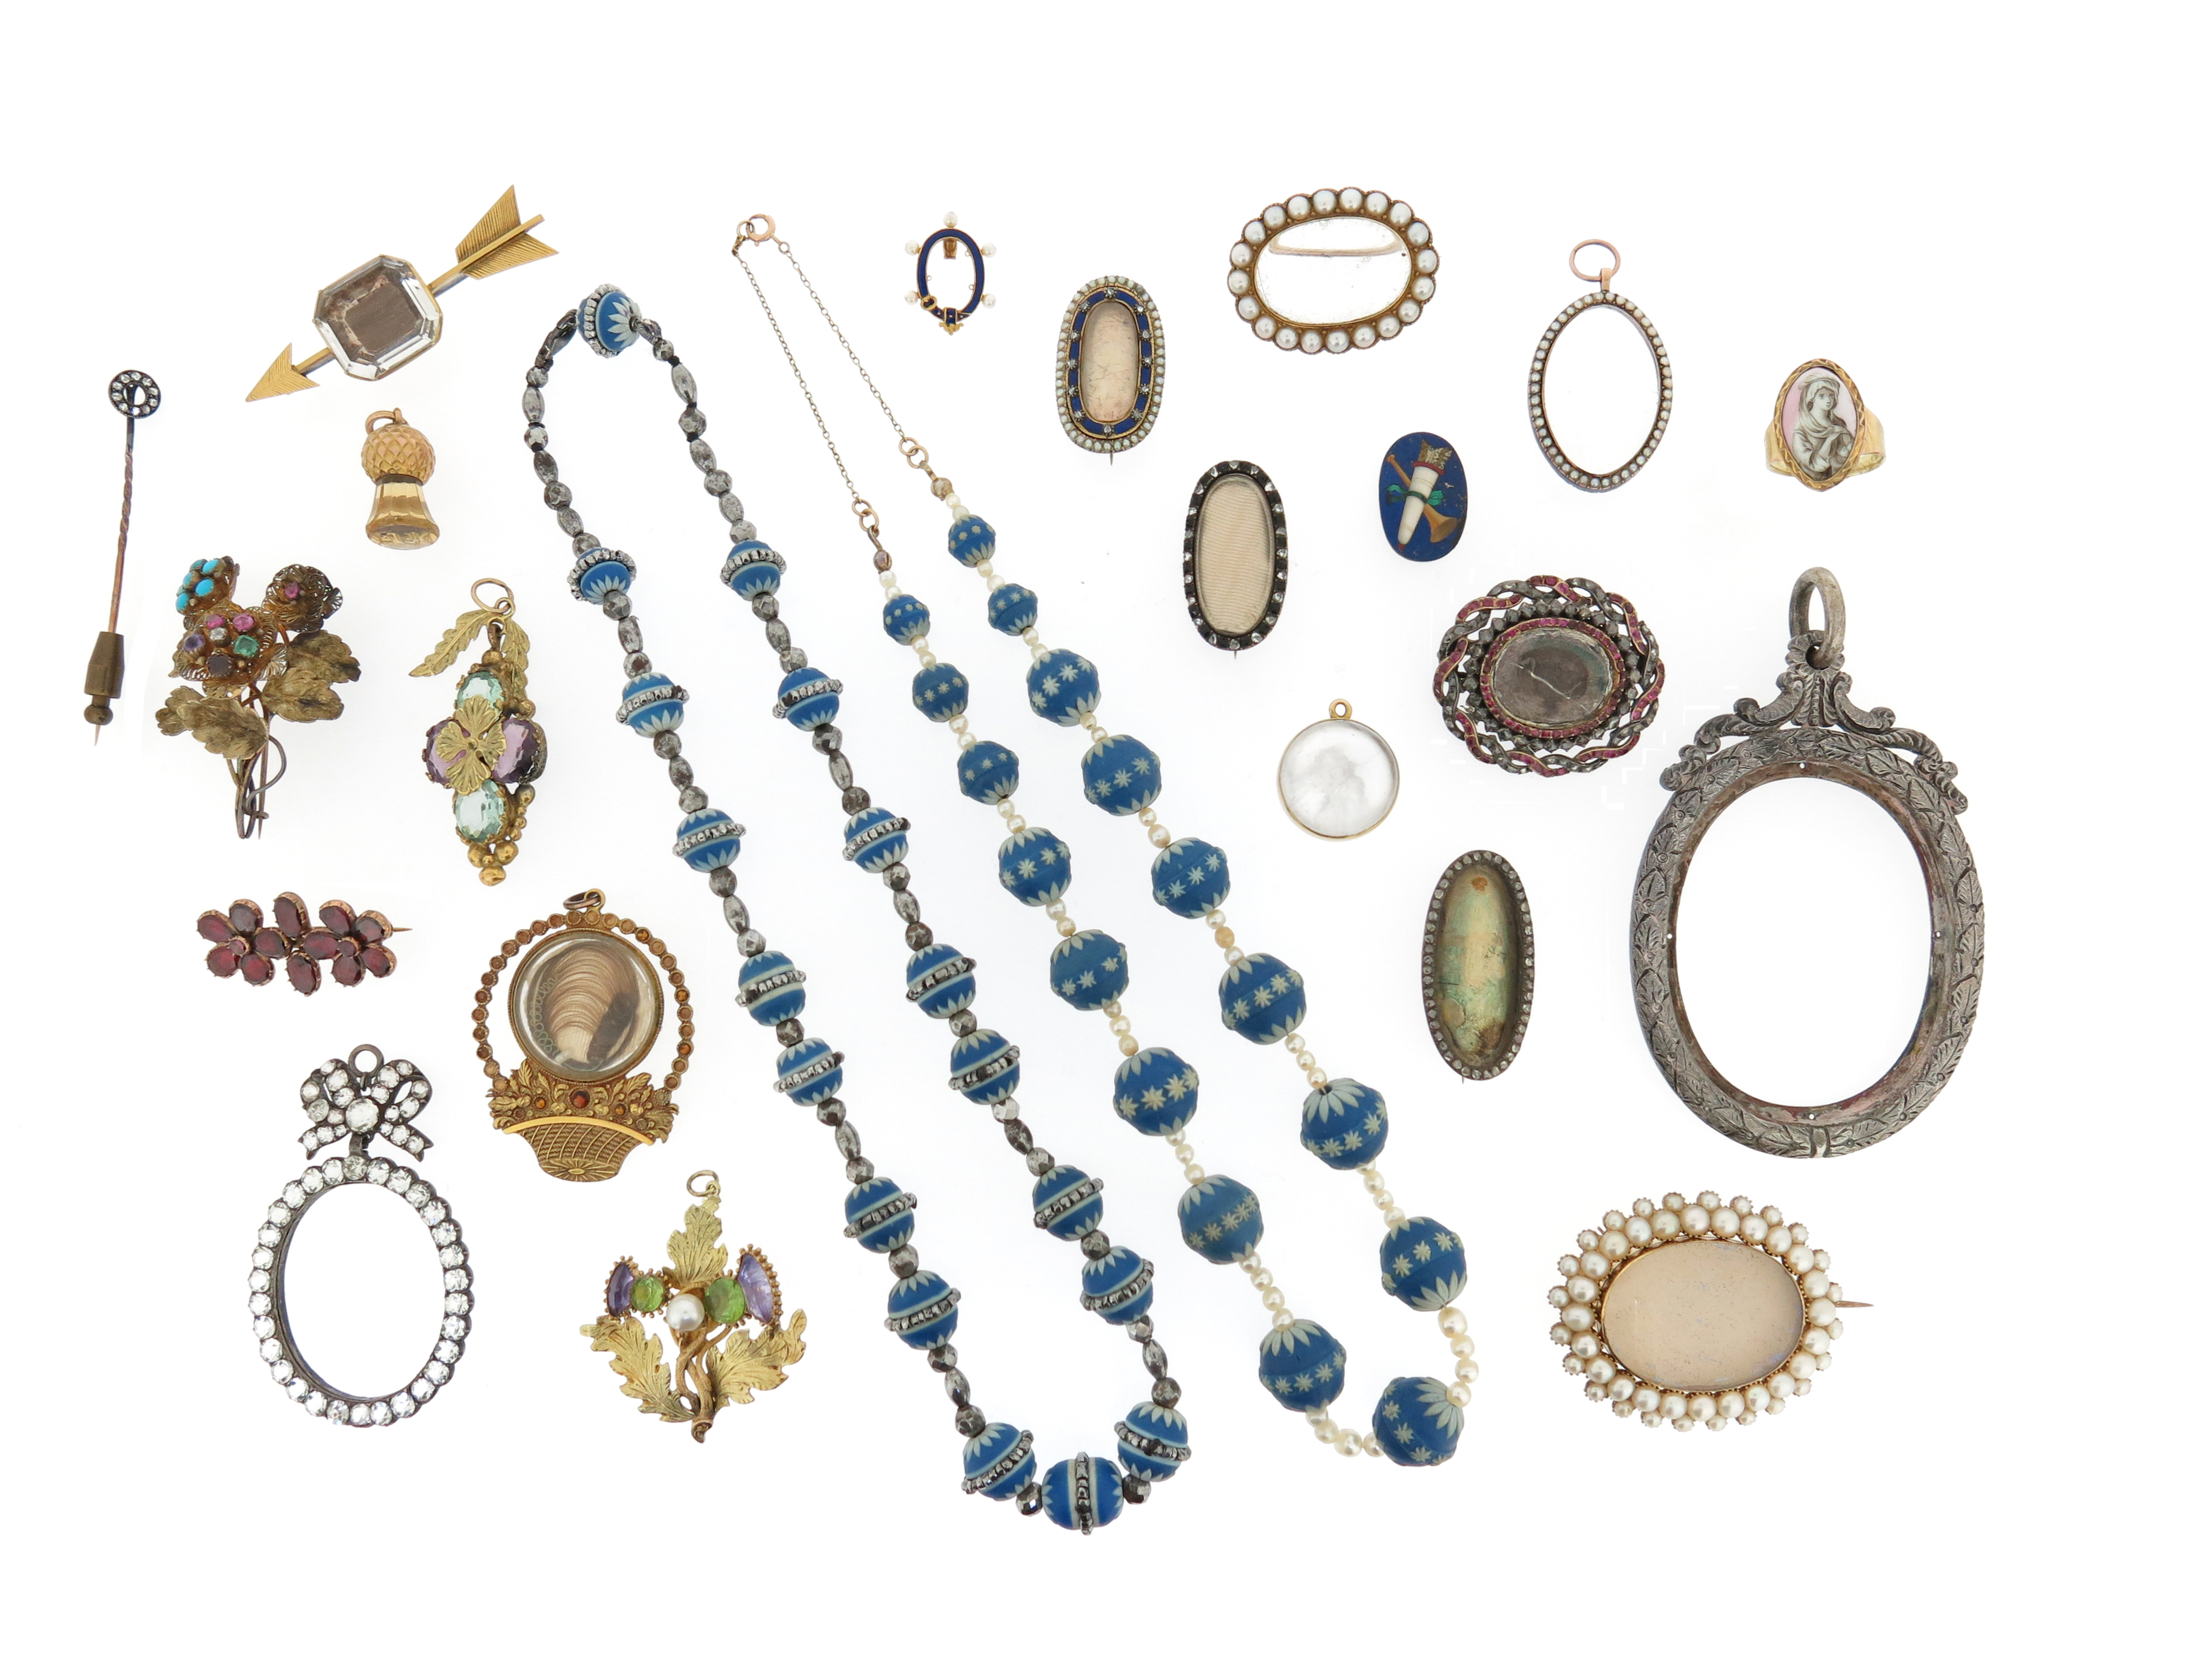 A small quantity of jewellery items, mostly 19th century, including two blue jasperware spherical